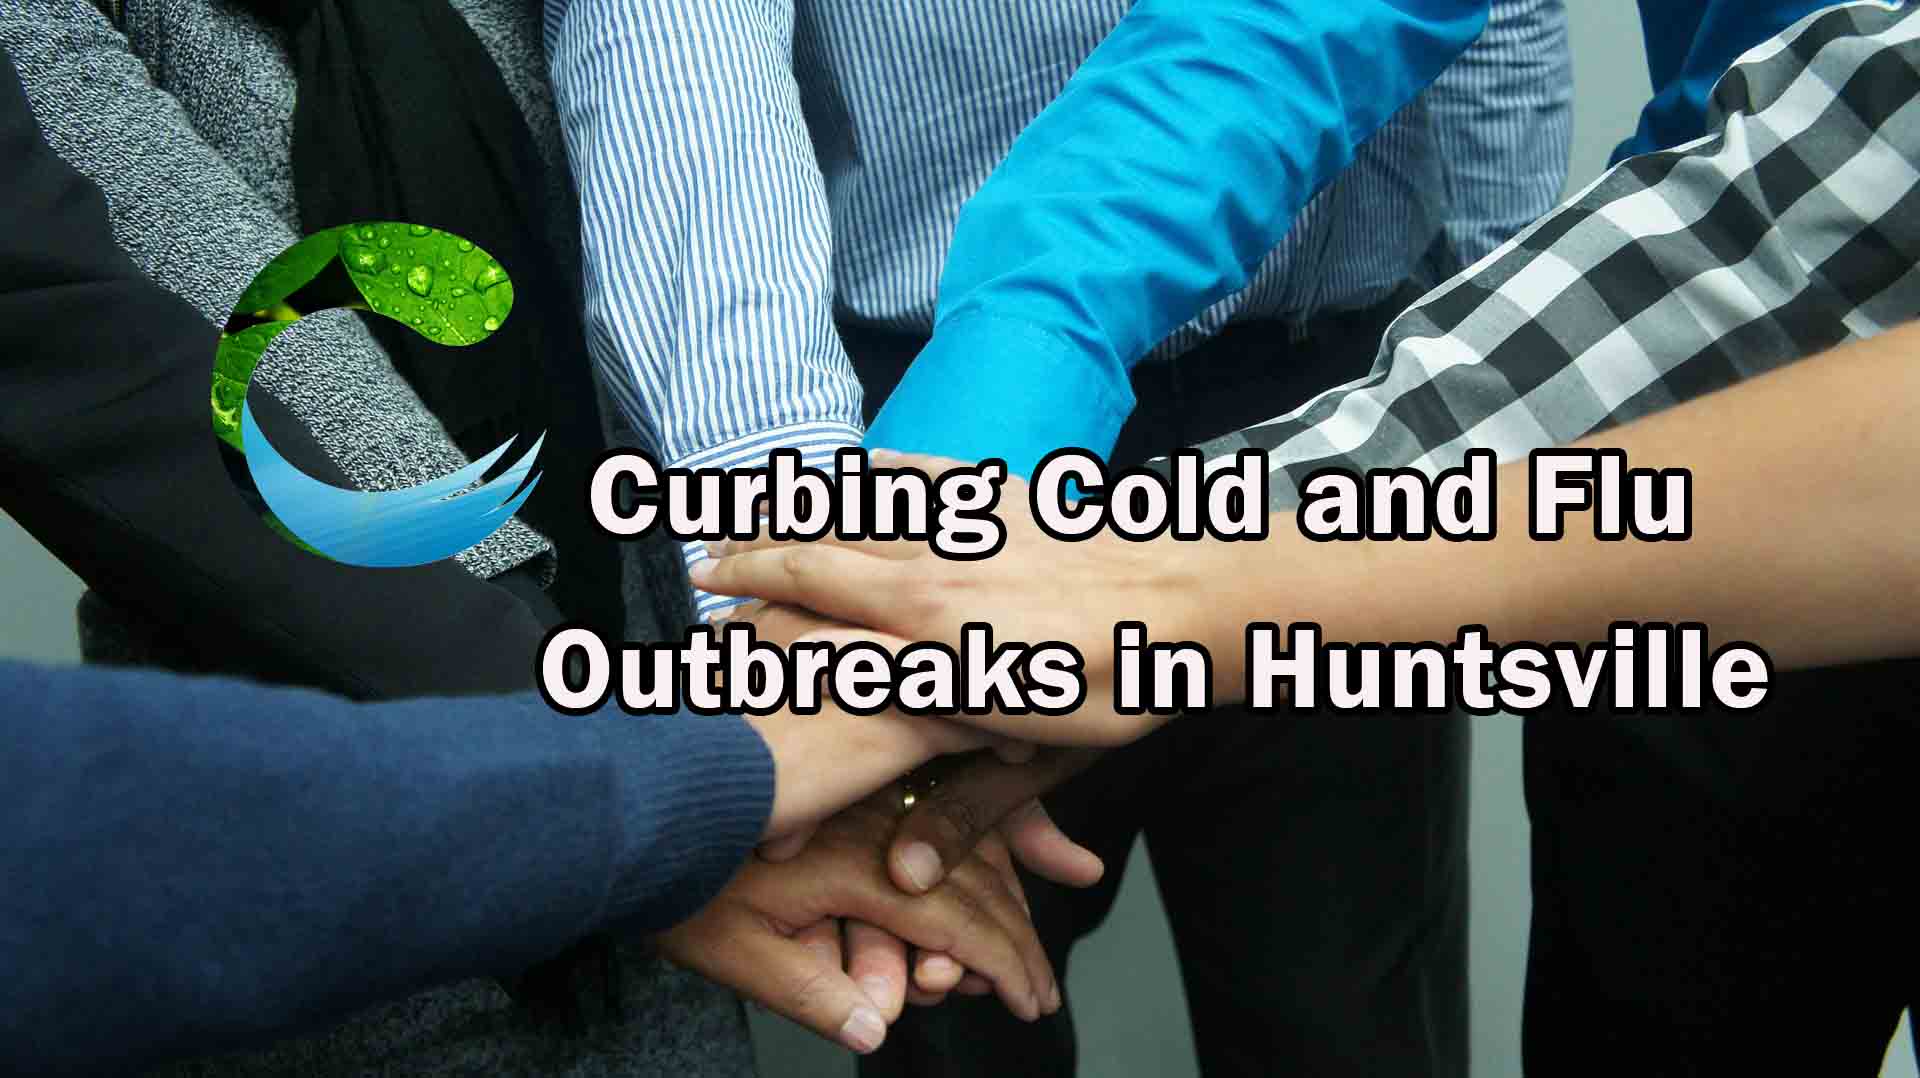 Curbing Cold and Flu Outbreaks in Huntsville